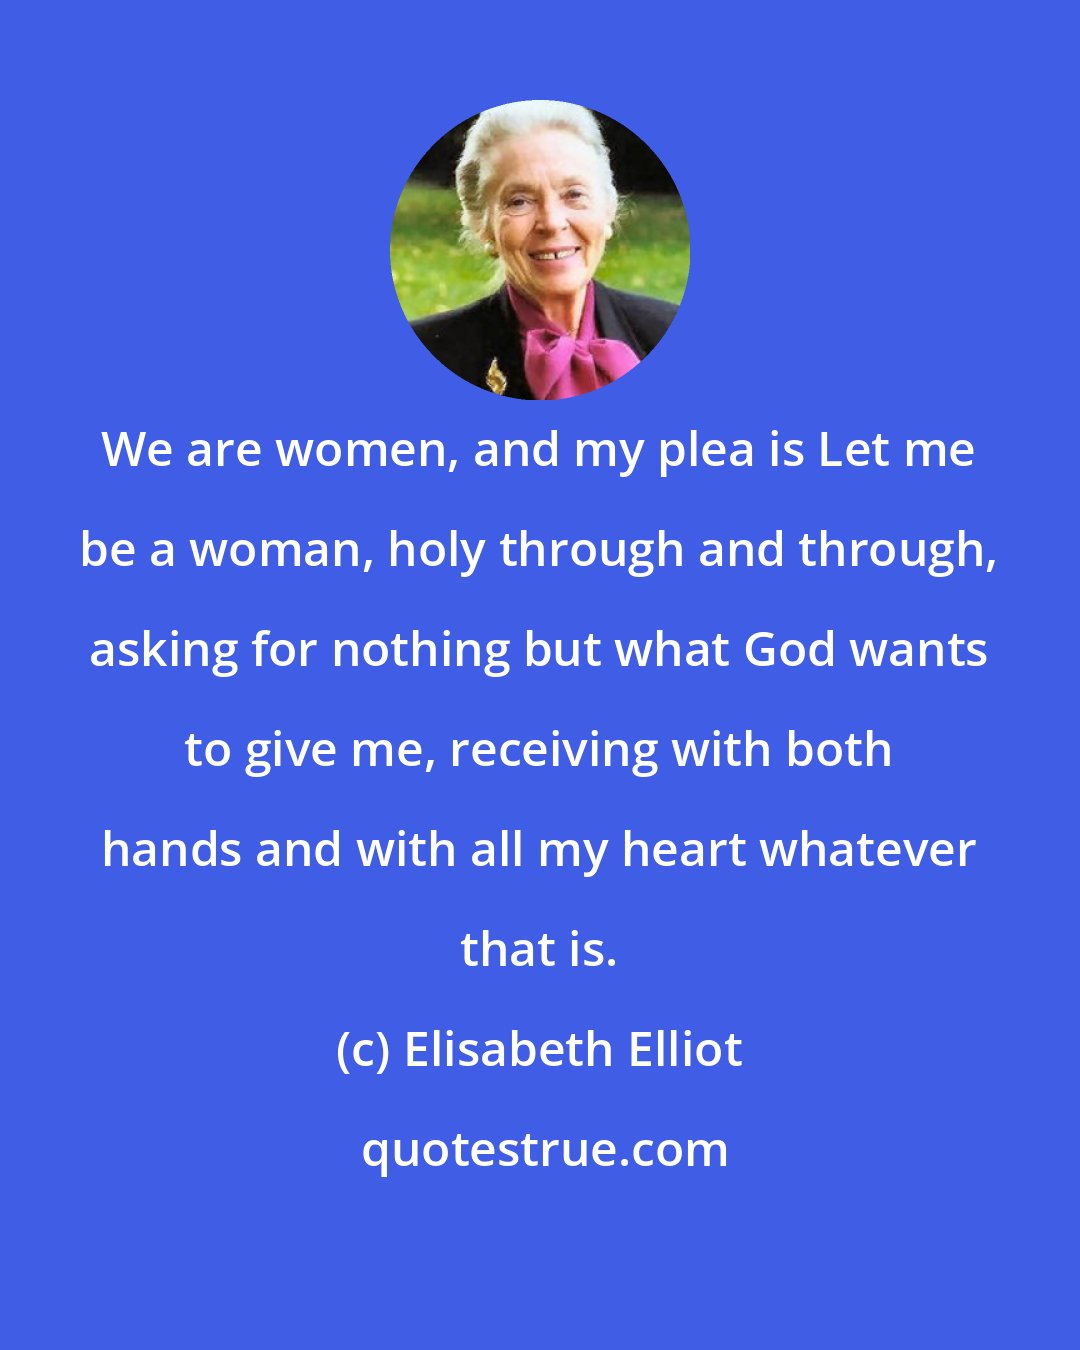 Elisabeth Elliot: We are women, and my plea is Let me be a woman, holy through and through, asking for nothing but what God wants to give me, receiving with both hands and with all my heart whatever that is.